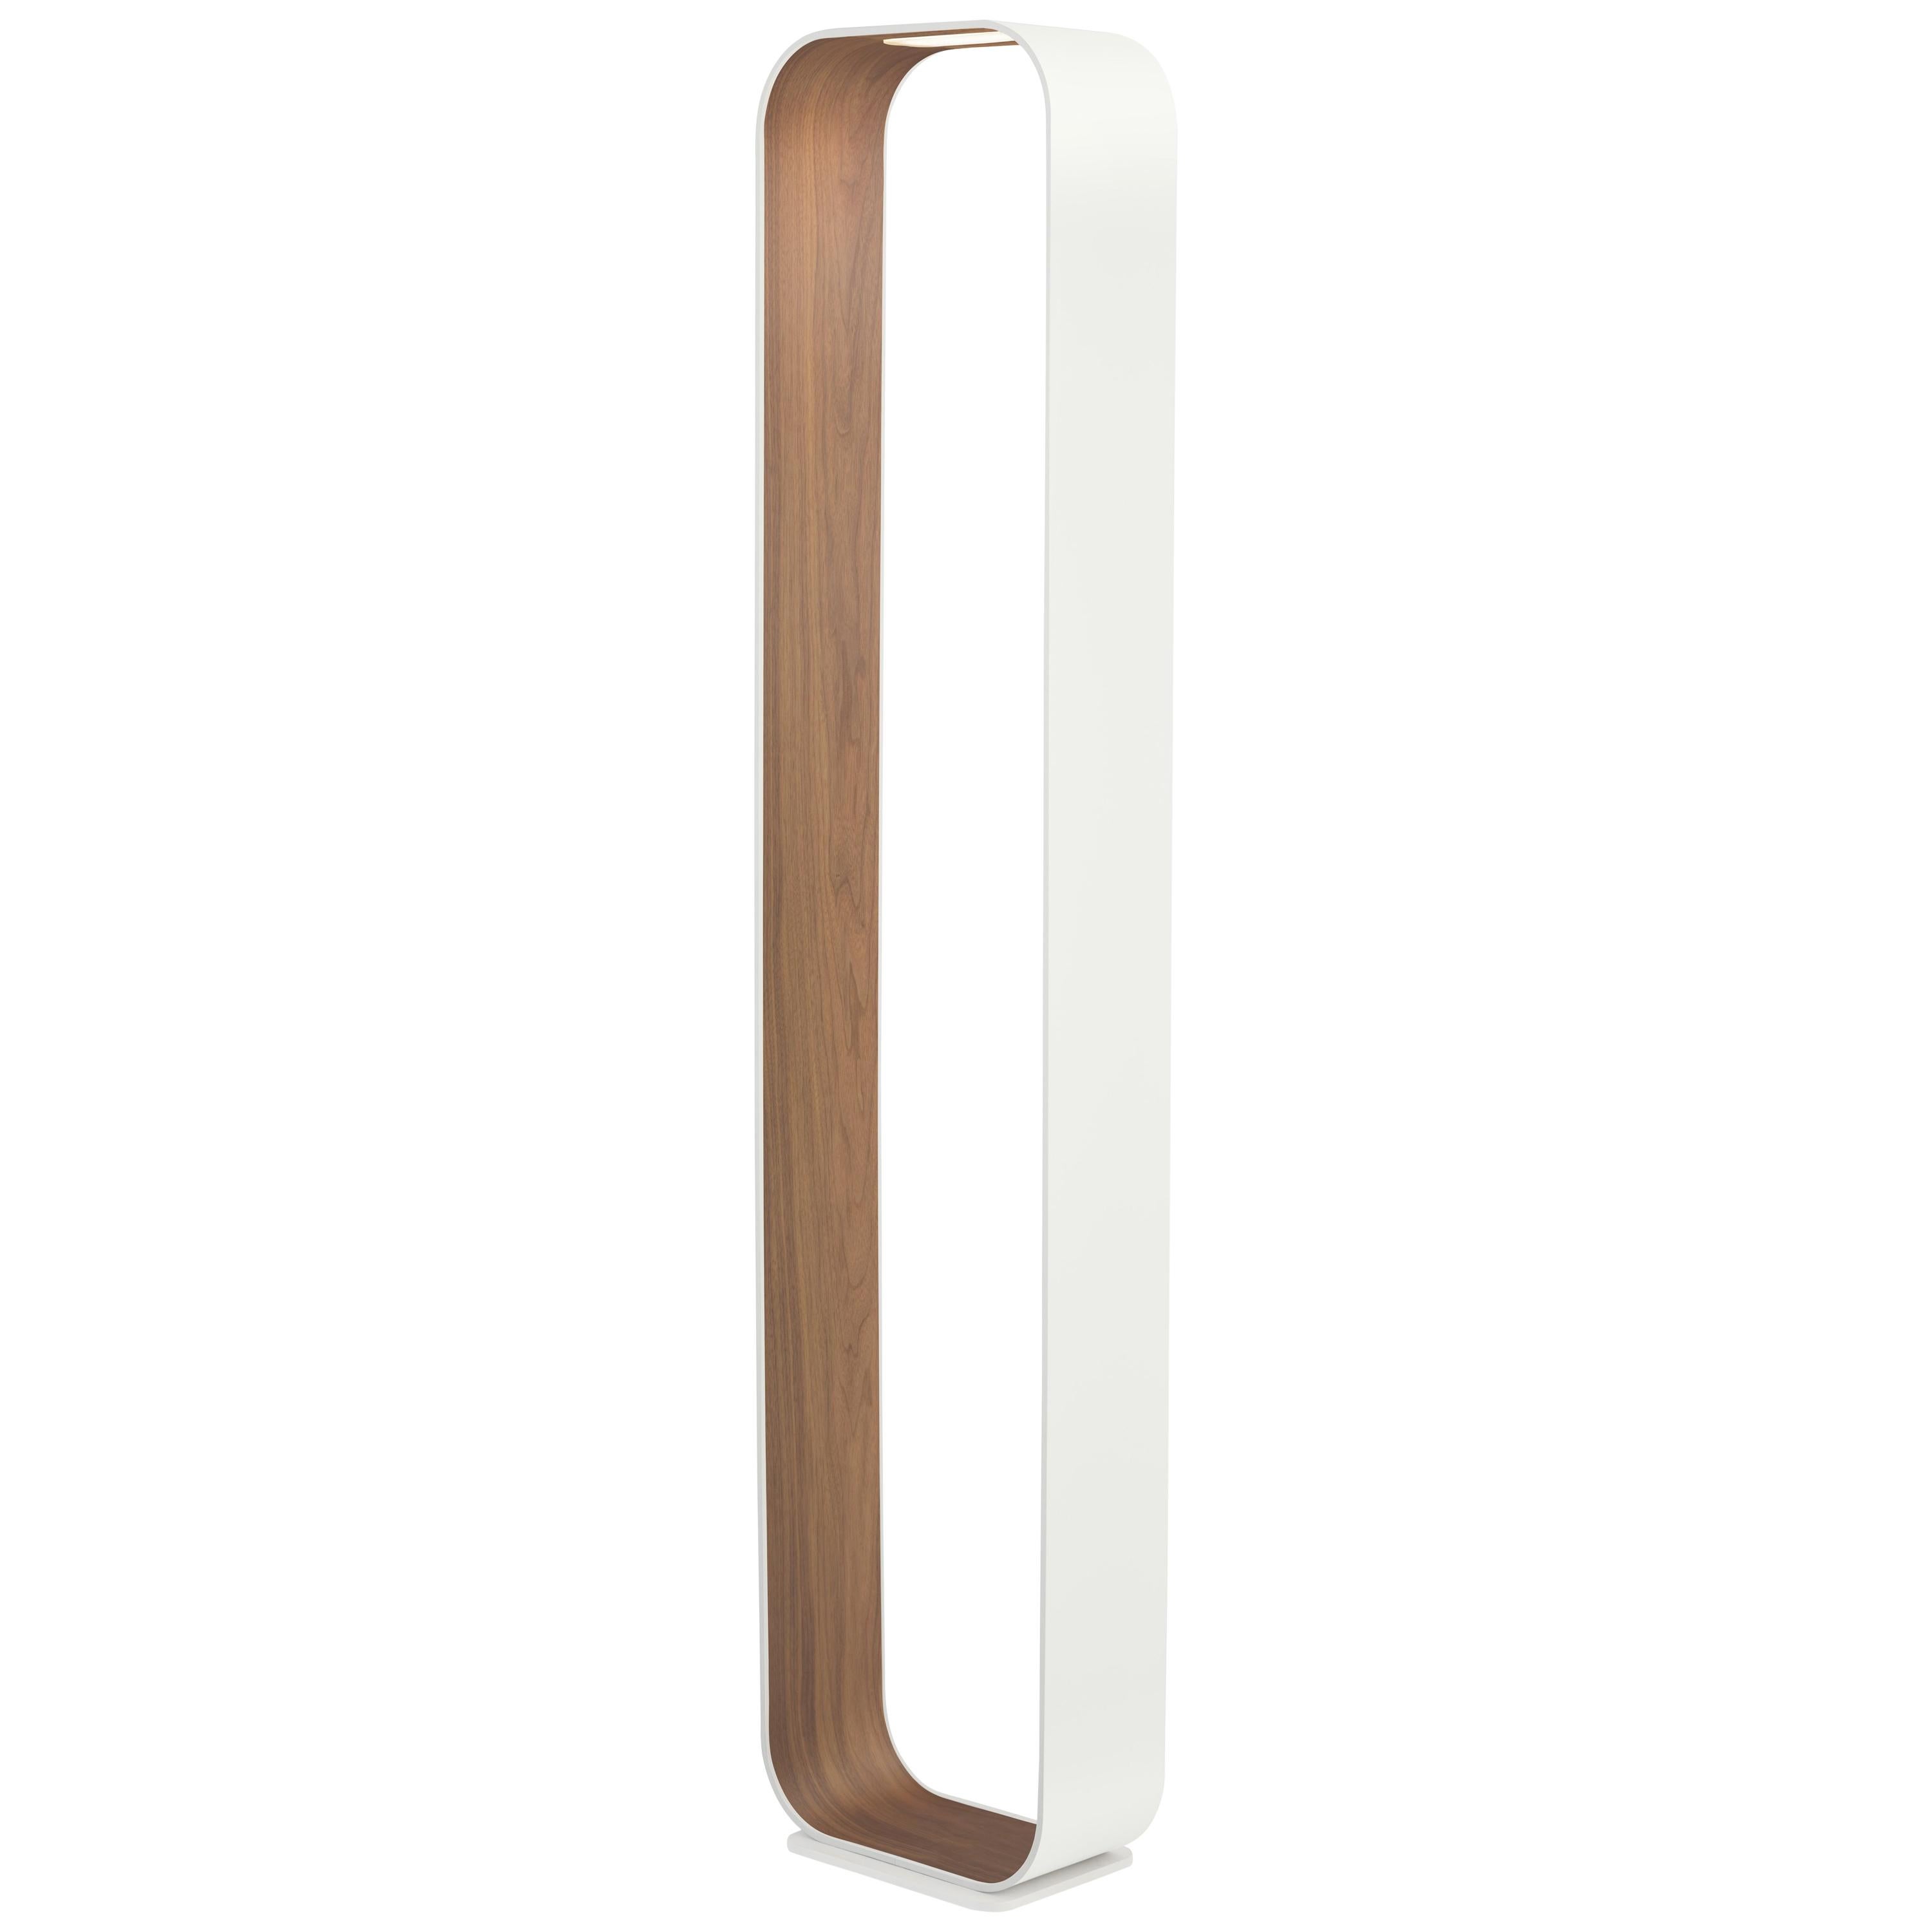 Contour Floor Lamp in White and Walnut by Pablo Designs